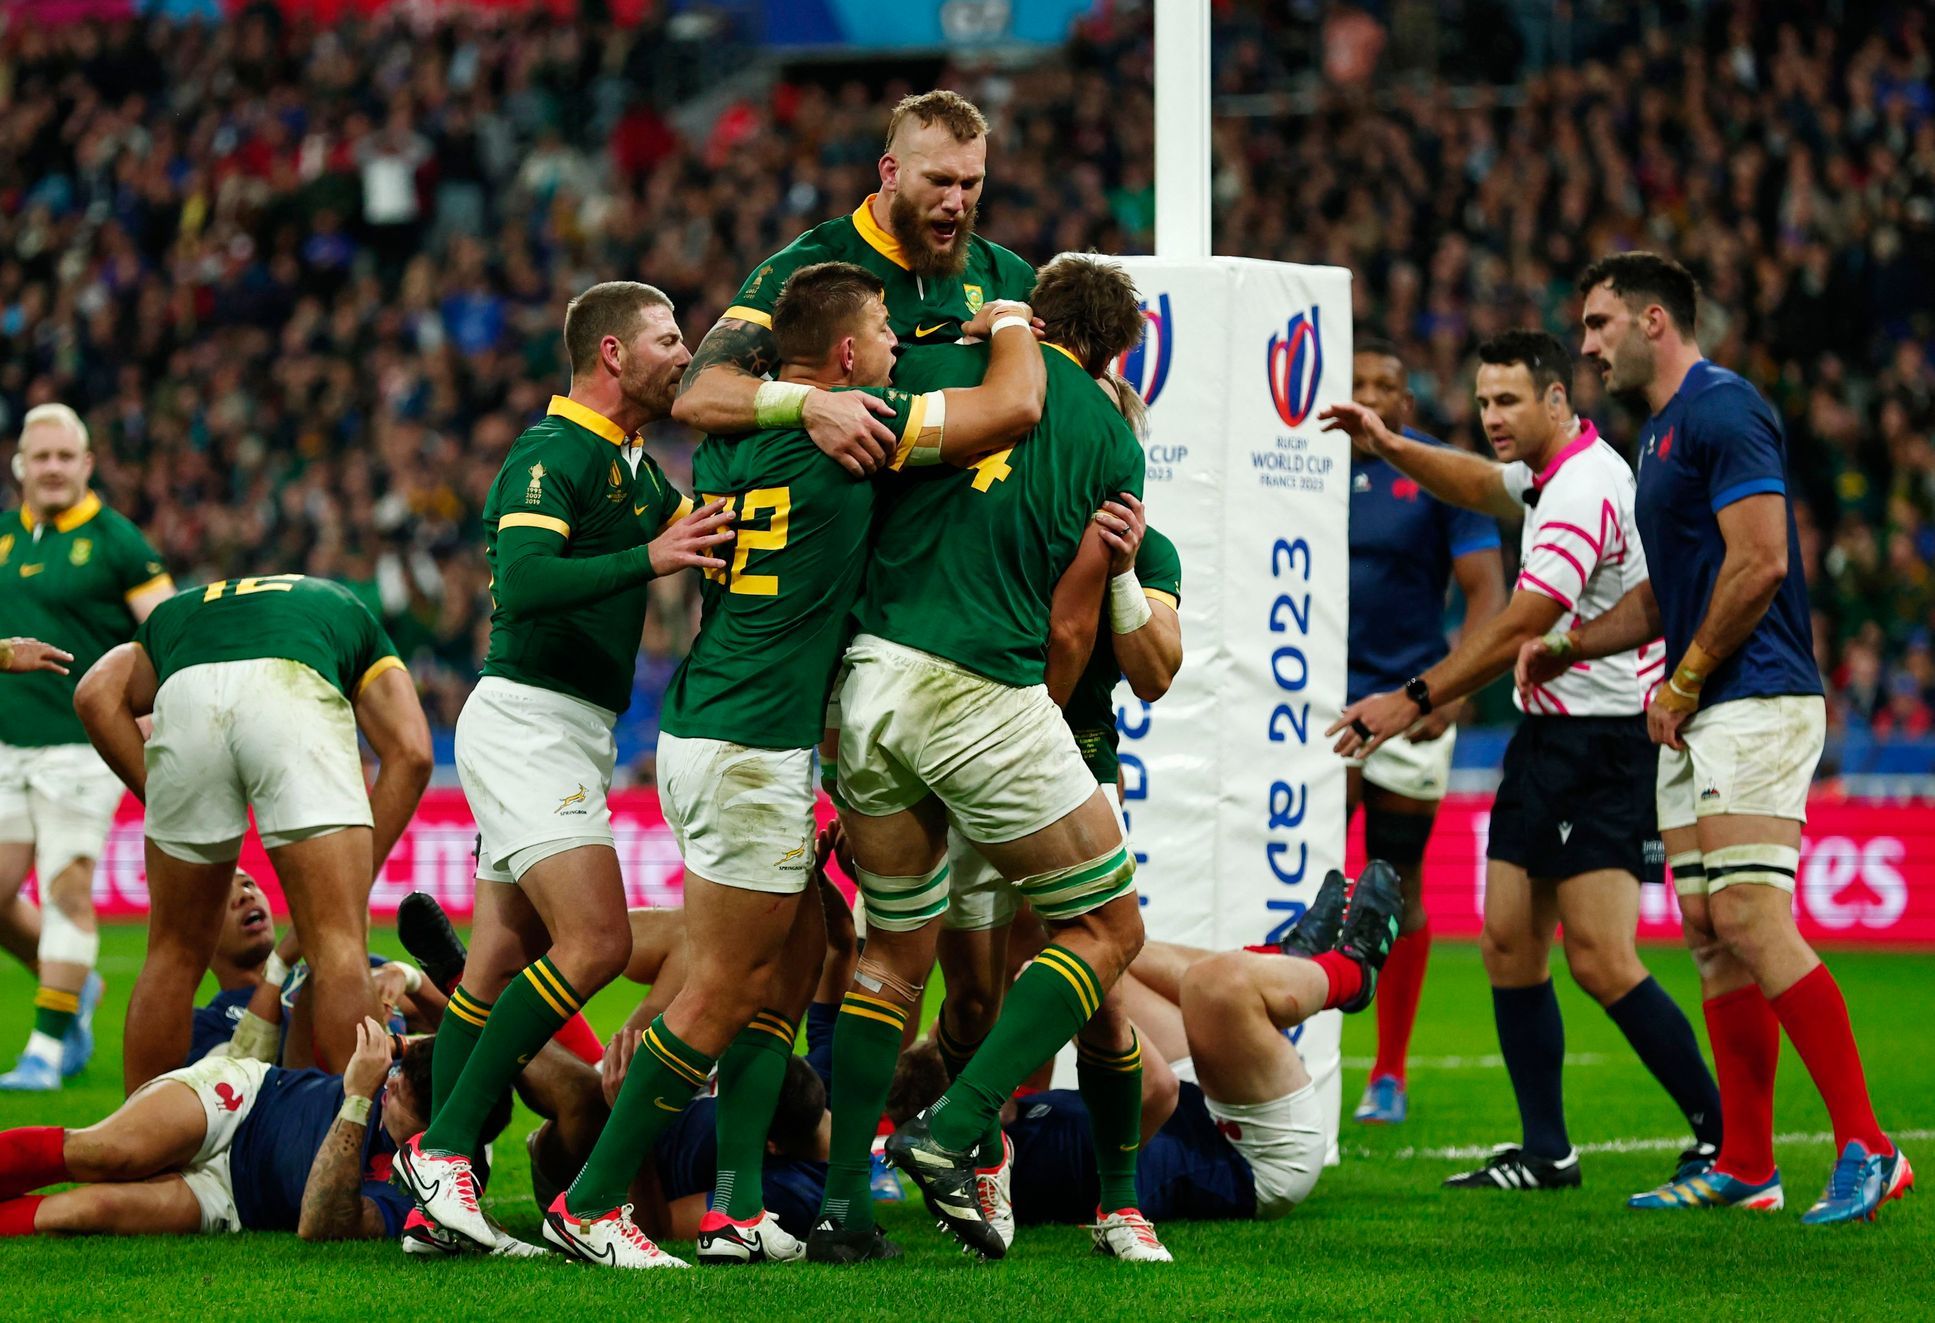 Thrilling battle and heartbreak in Paris.  The Springboks eliminated France, decided by a single point